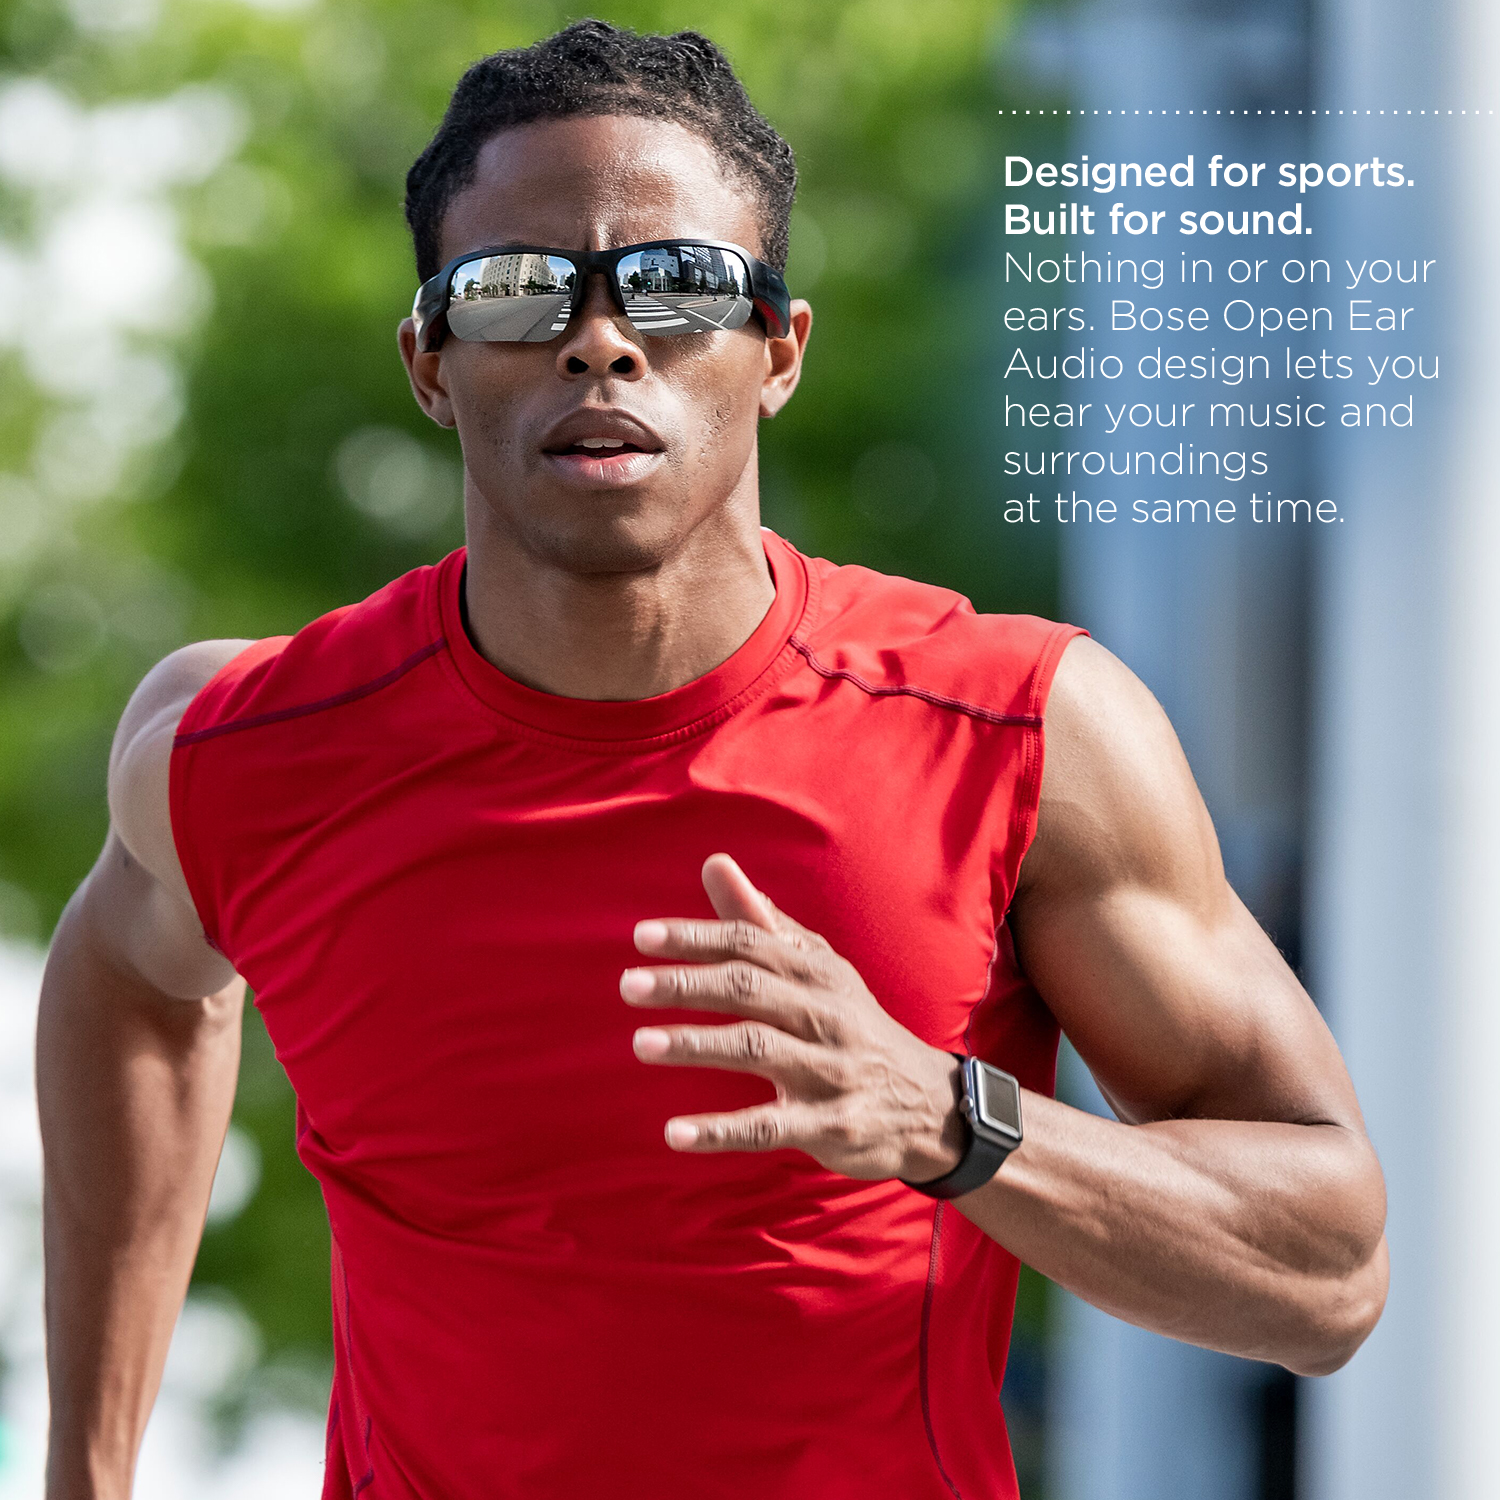 Bose Frames Tempo Bluetooth Sports Sunglasses with Polarized Lenses, Black - image 3 of 13